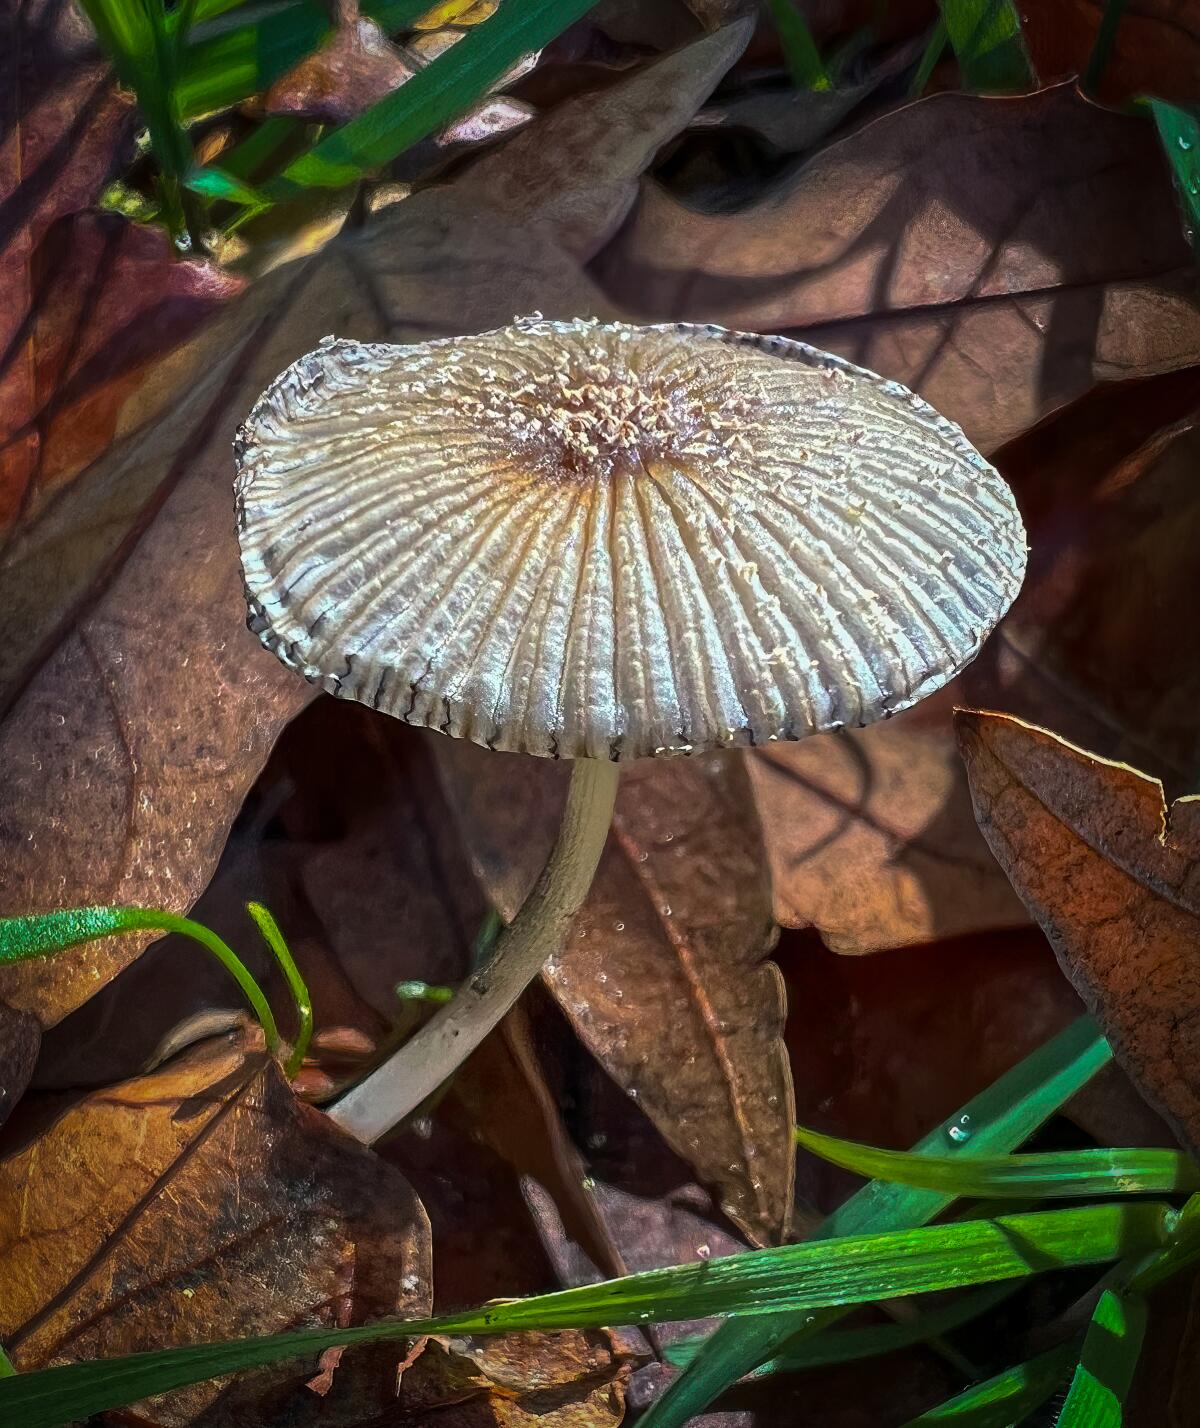 A mushroom grows in a forest in San Diego County.